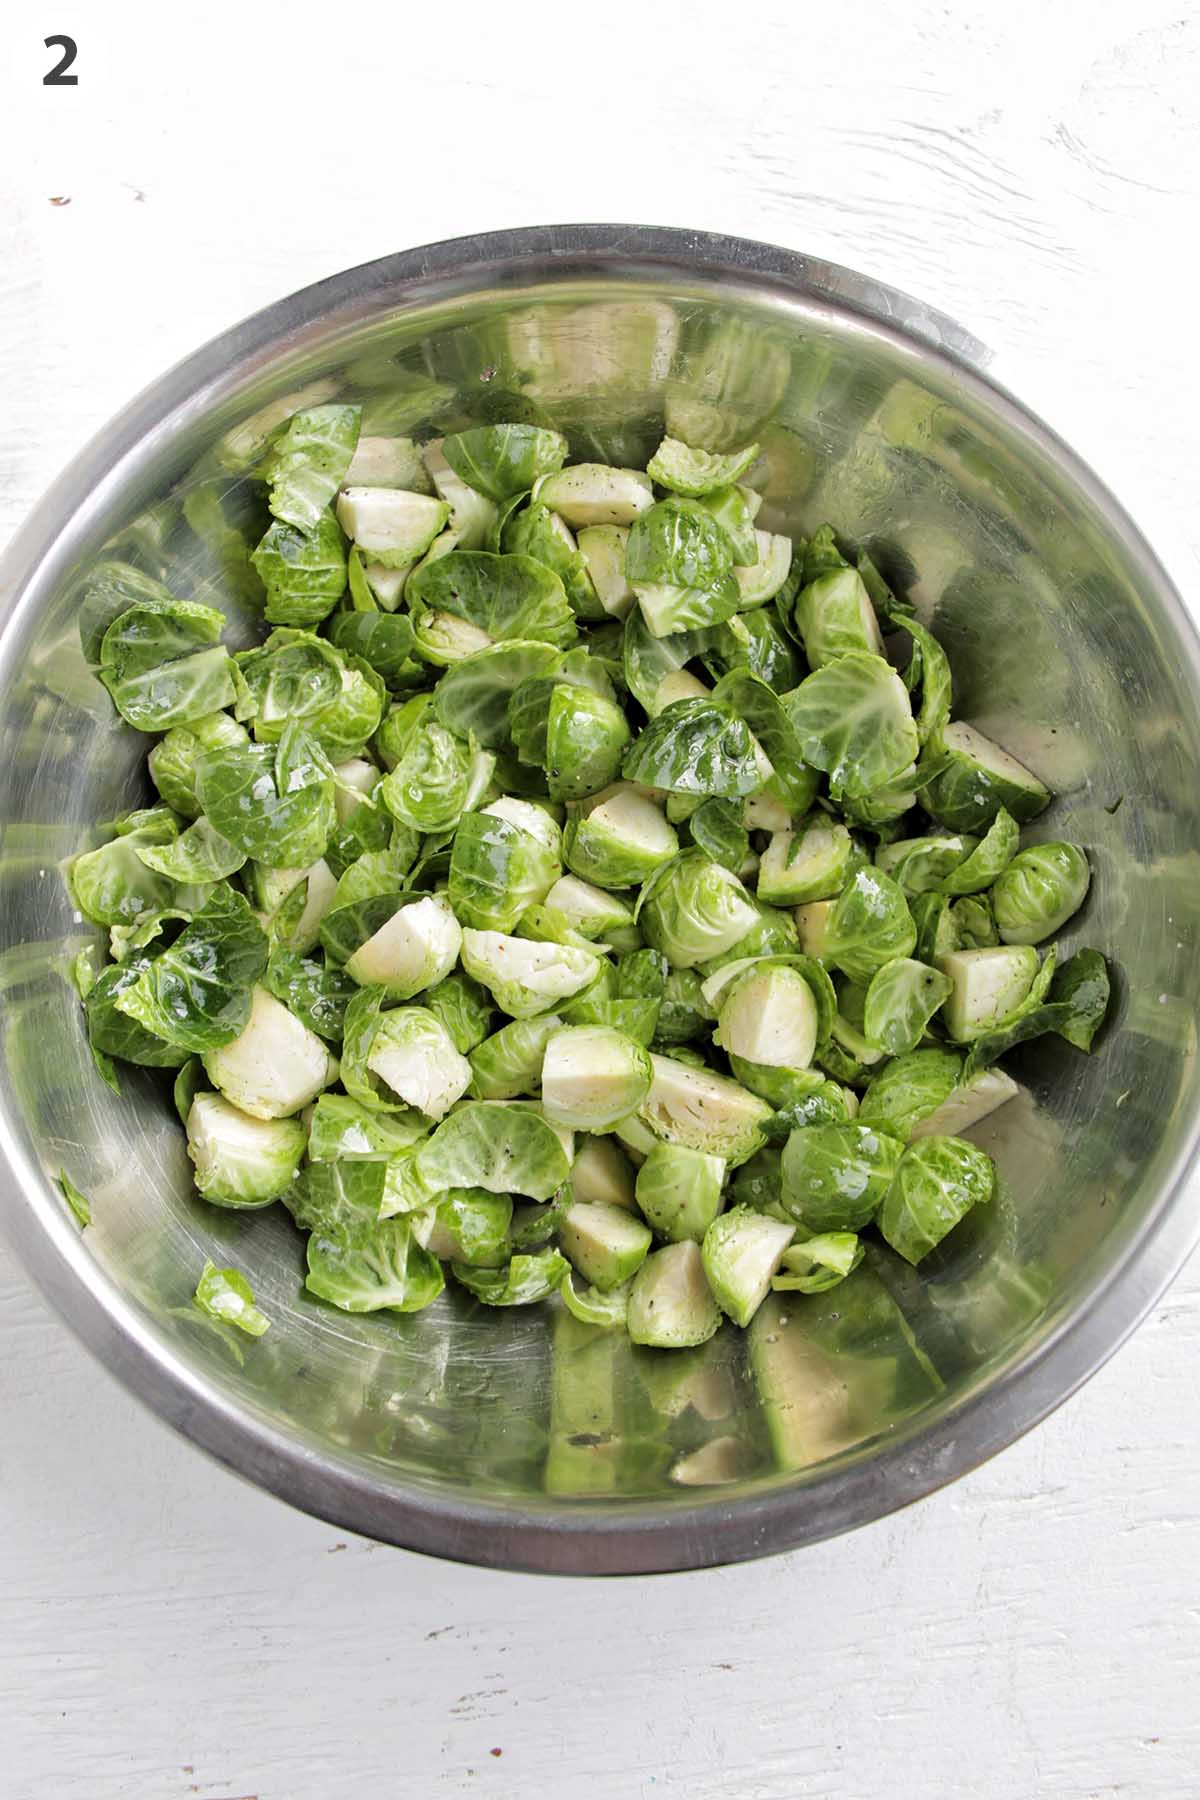 numbered photo showing brussel sprouts in a mixing bowl.